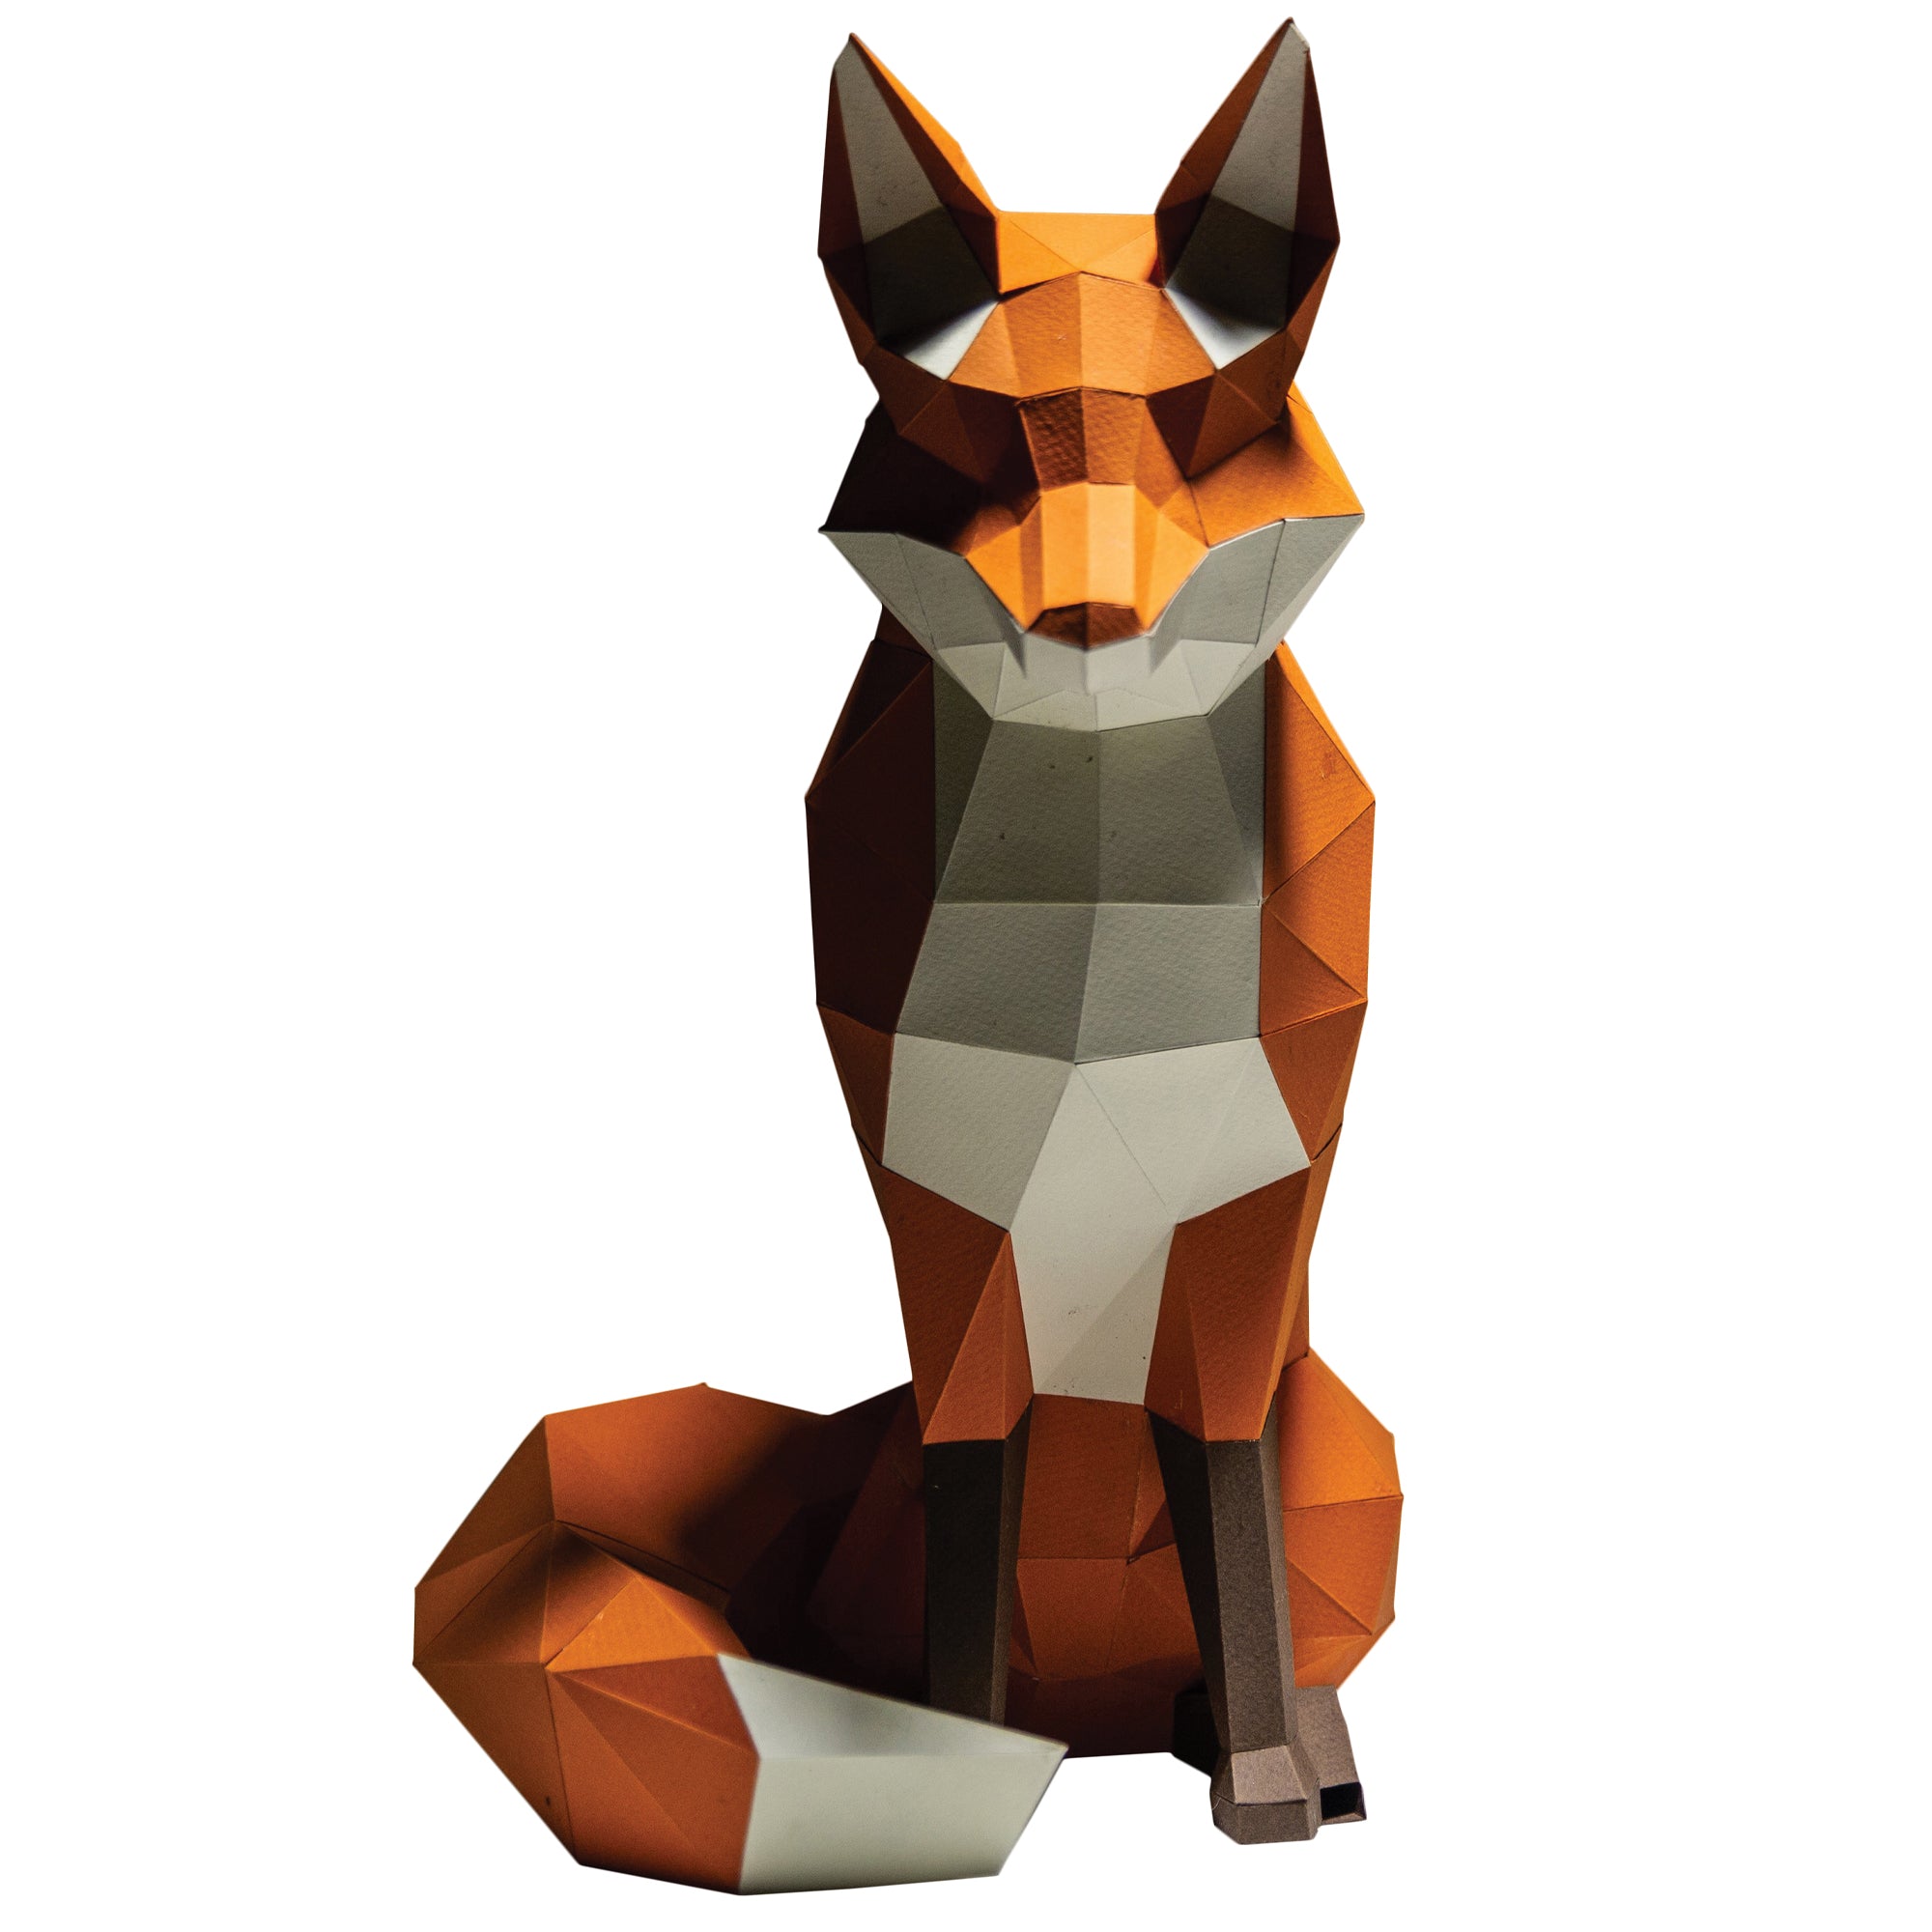 Papercraft fox on a white background. Geometrical-shaped fox that is folded and cut paper pieces glued together. Fox is mainly a dark orange with black paws and a white chest, chin area, inside ears, and tip of tail.